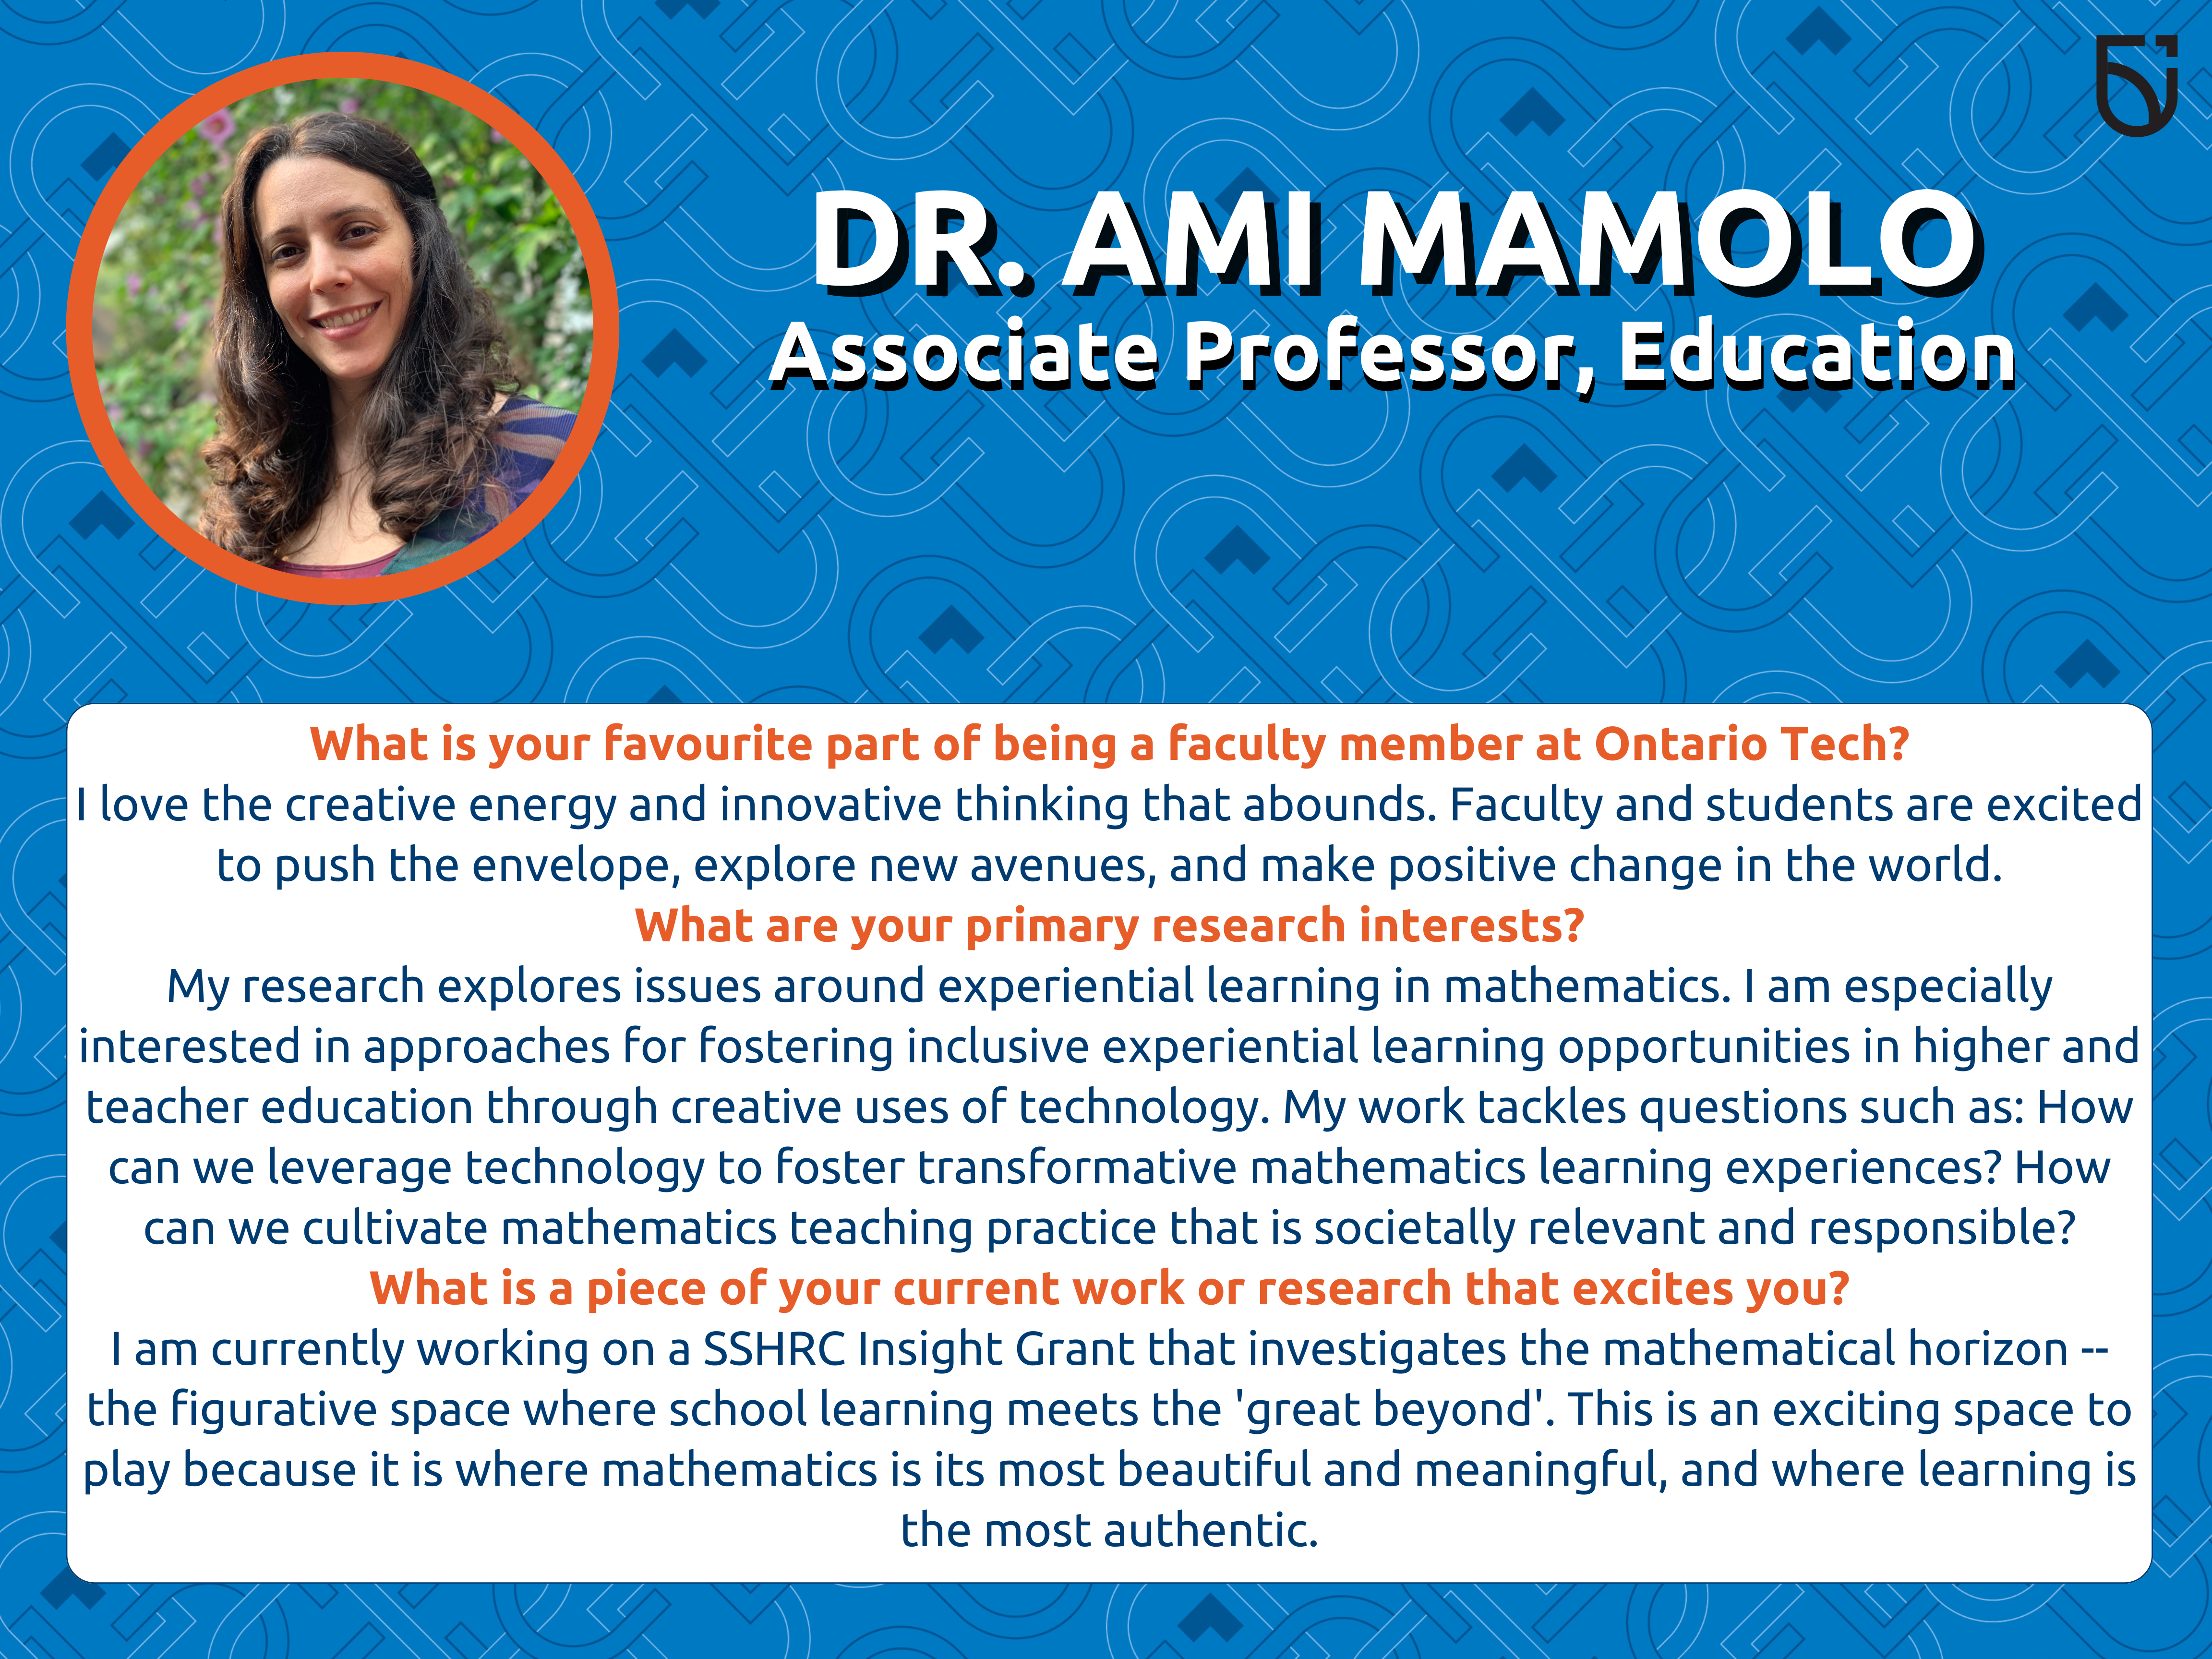 This photo is a Women’s Wednesday feature of Dr. Ami Mamolo, an Associate Professor in the Mitch & Leslie Frazer Faculty of Education.